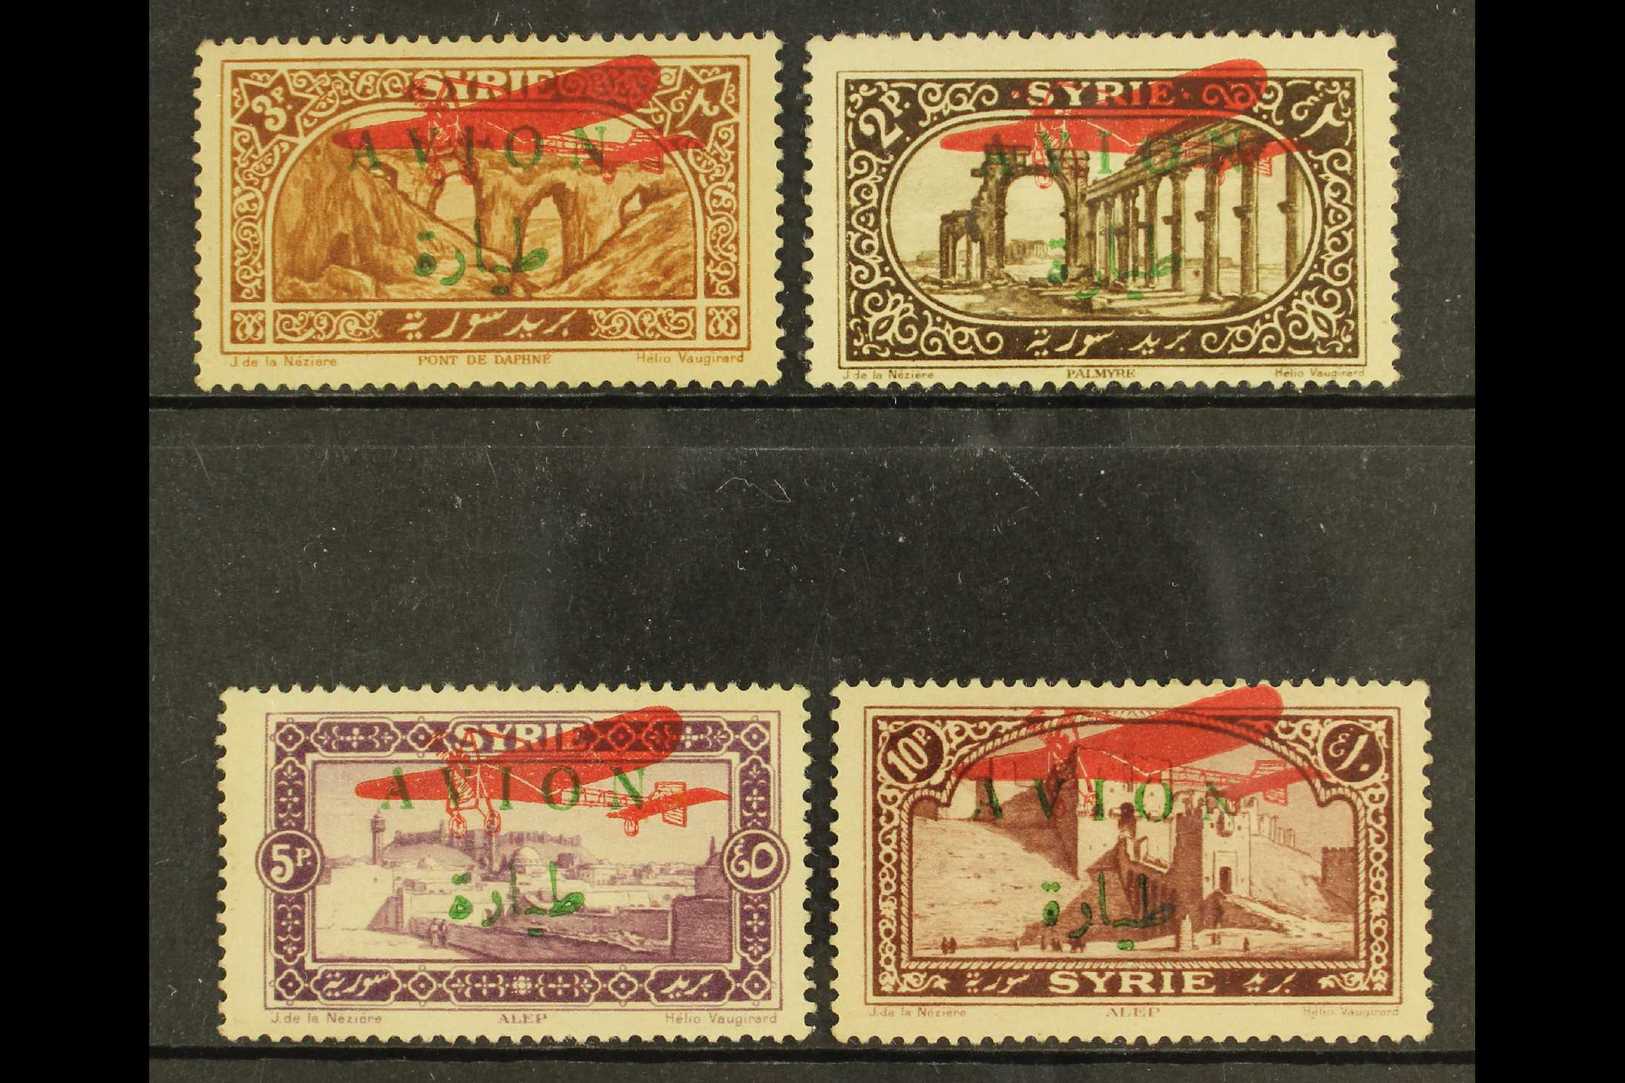 1925 AIRS WITH 1926 OVERPRINTS.  1925 Complete Set With "AVION" Opt In Green, With Additional 1926 Aeroplane Opt In Red, - Syrie